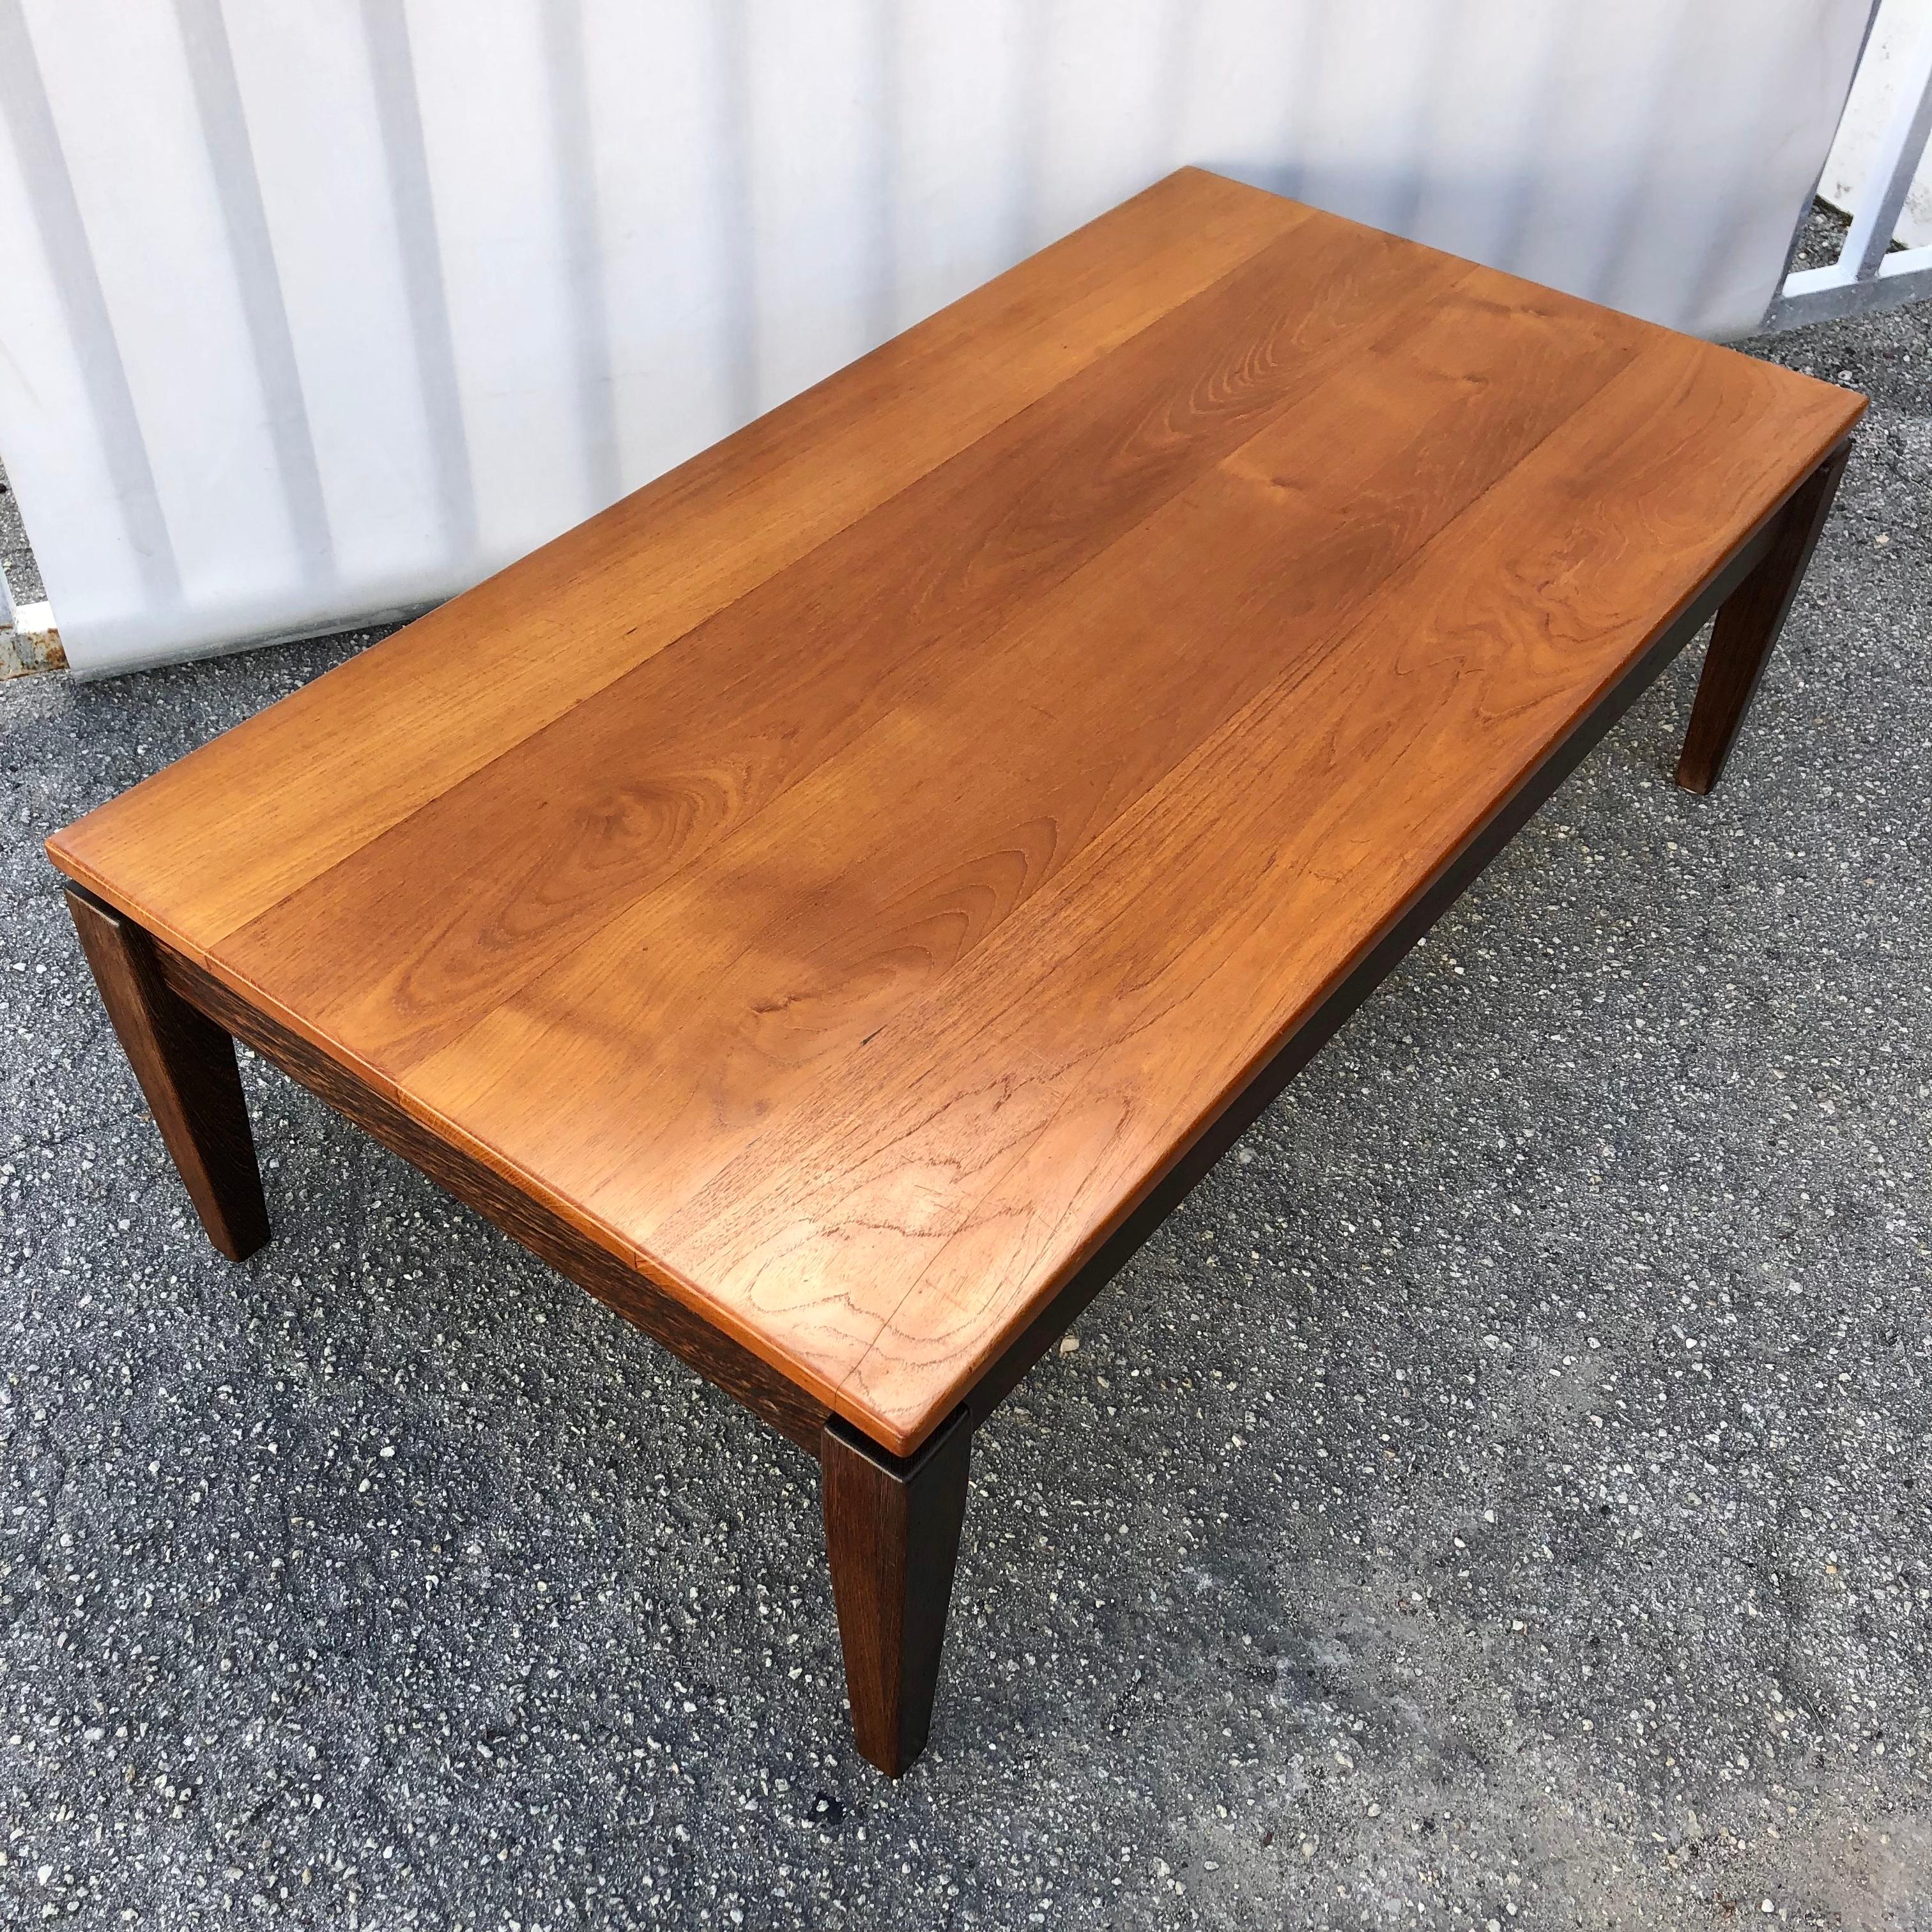 Vintage Mid Century Modern Custom Crafted Solid Wood Coffee Table, Signed by the maker. Circa 1960s. 
Features a sleek minimalist design with a solid wood floating top with contrasting color legs, a beautiful wood grain, and a magnificent